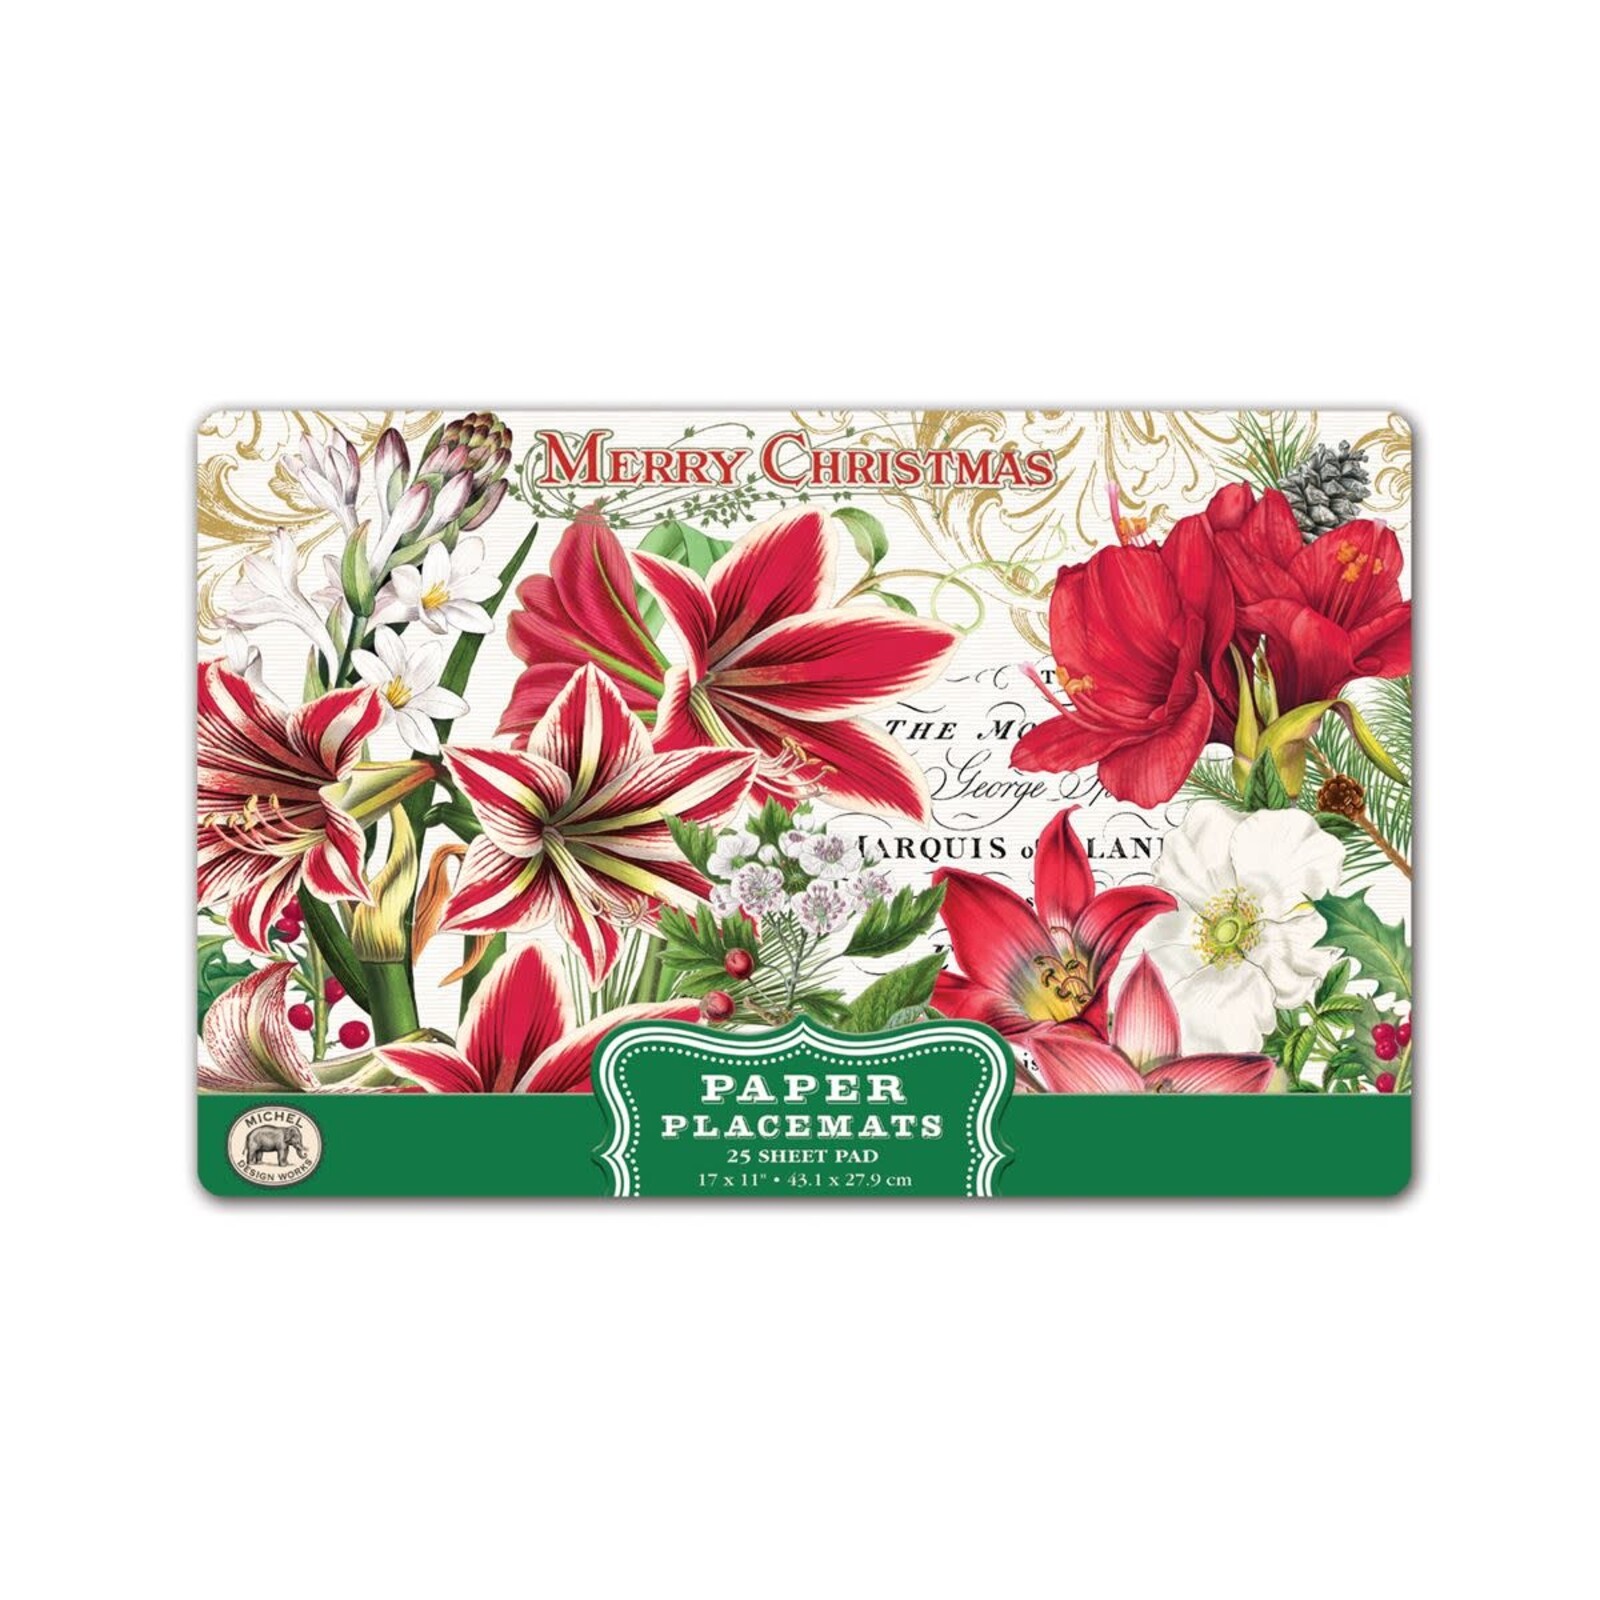 Michel Design Works Merry Christmas Placemats   PM346 loading=